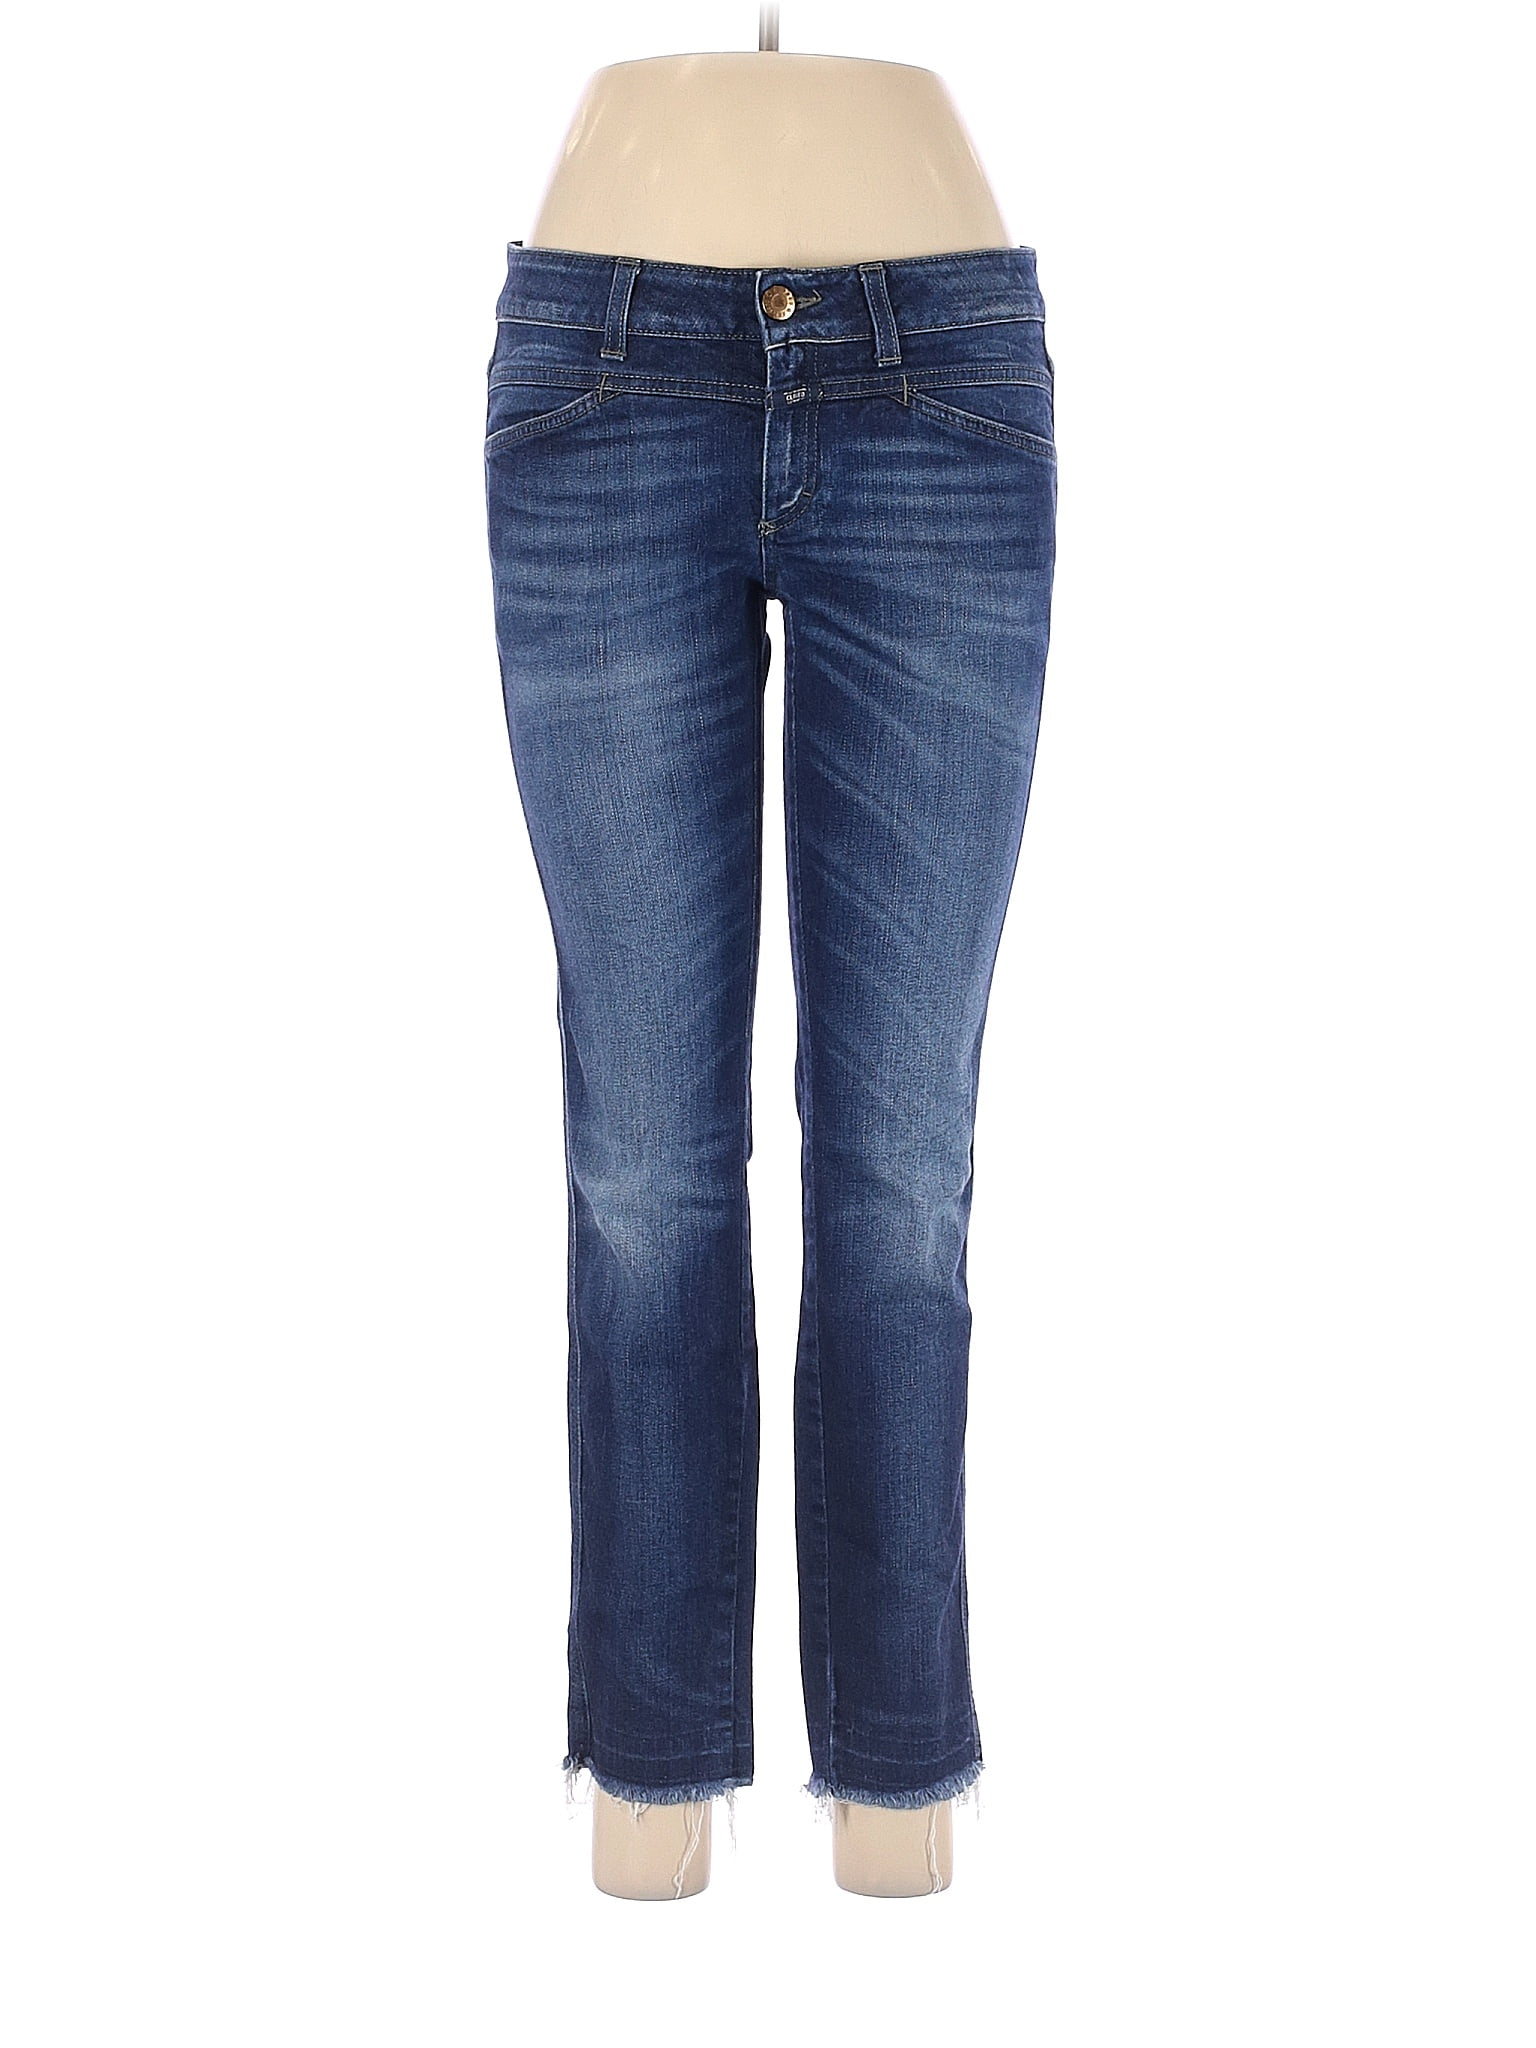 thredUP Closed off Waist - Blue Jeans Solid | 81% 28